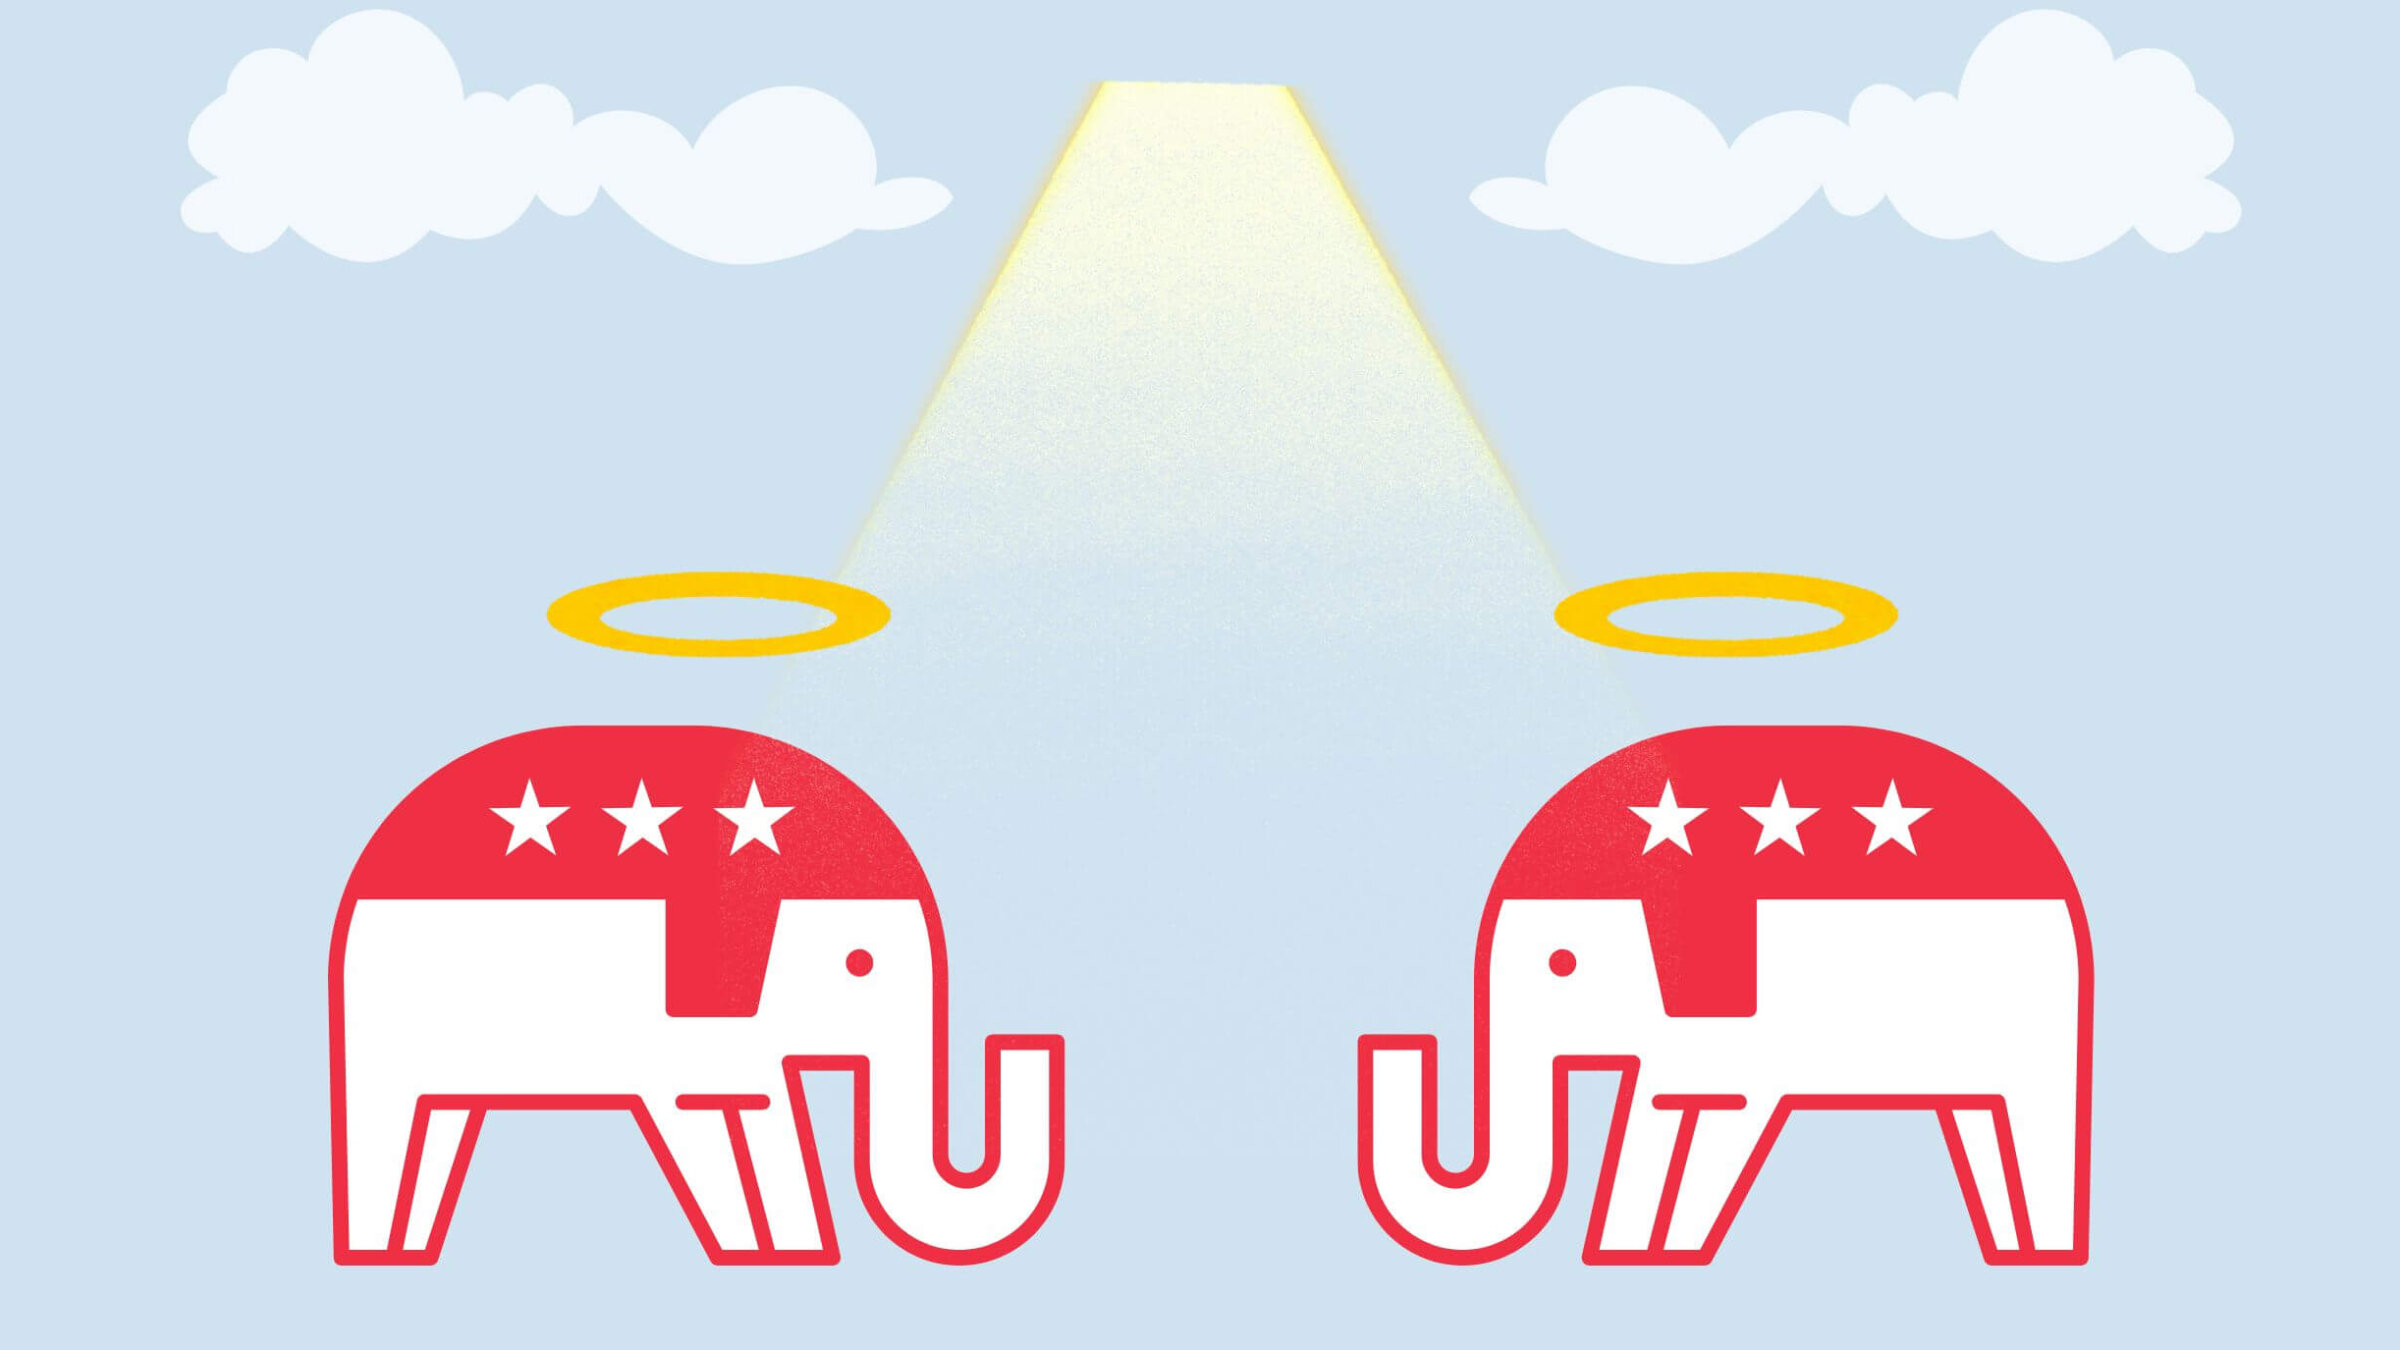 Republicans are claiming divine intervention saved Trump — what if they're right?